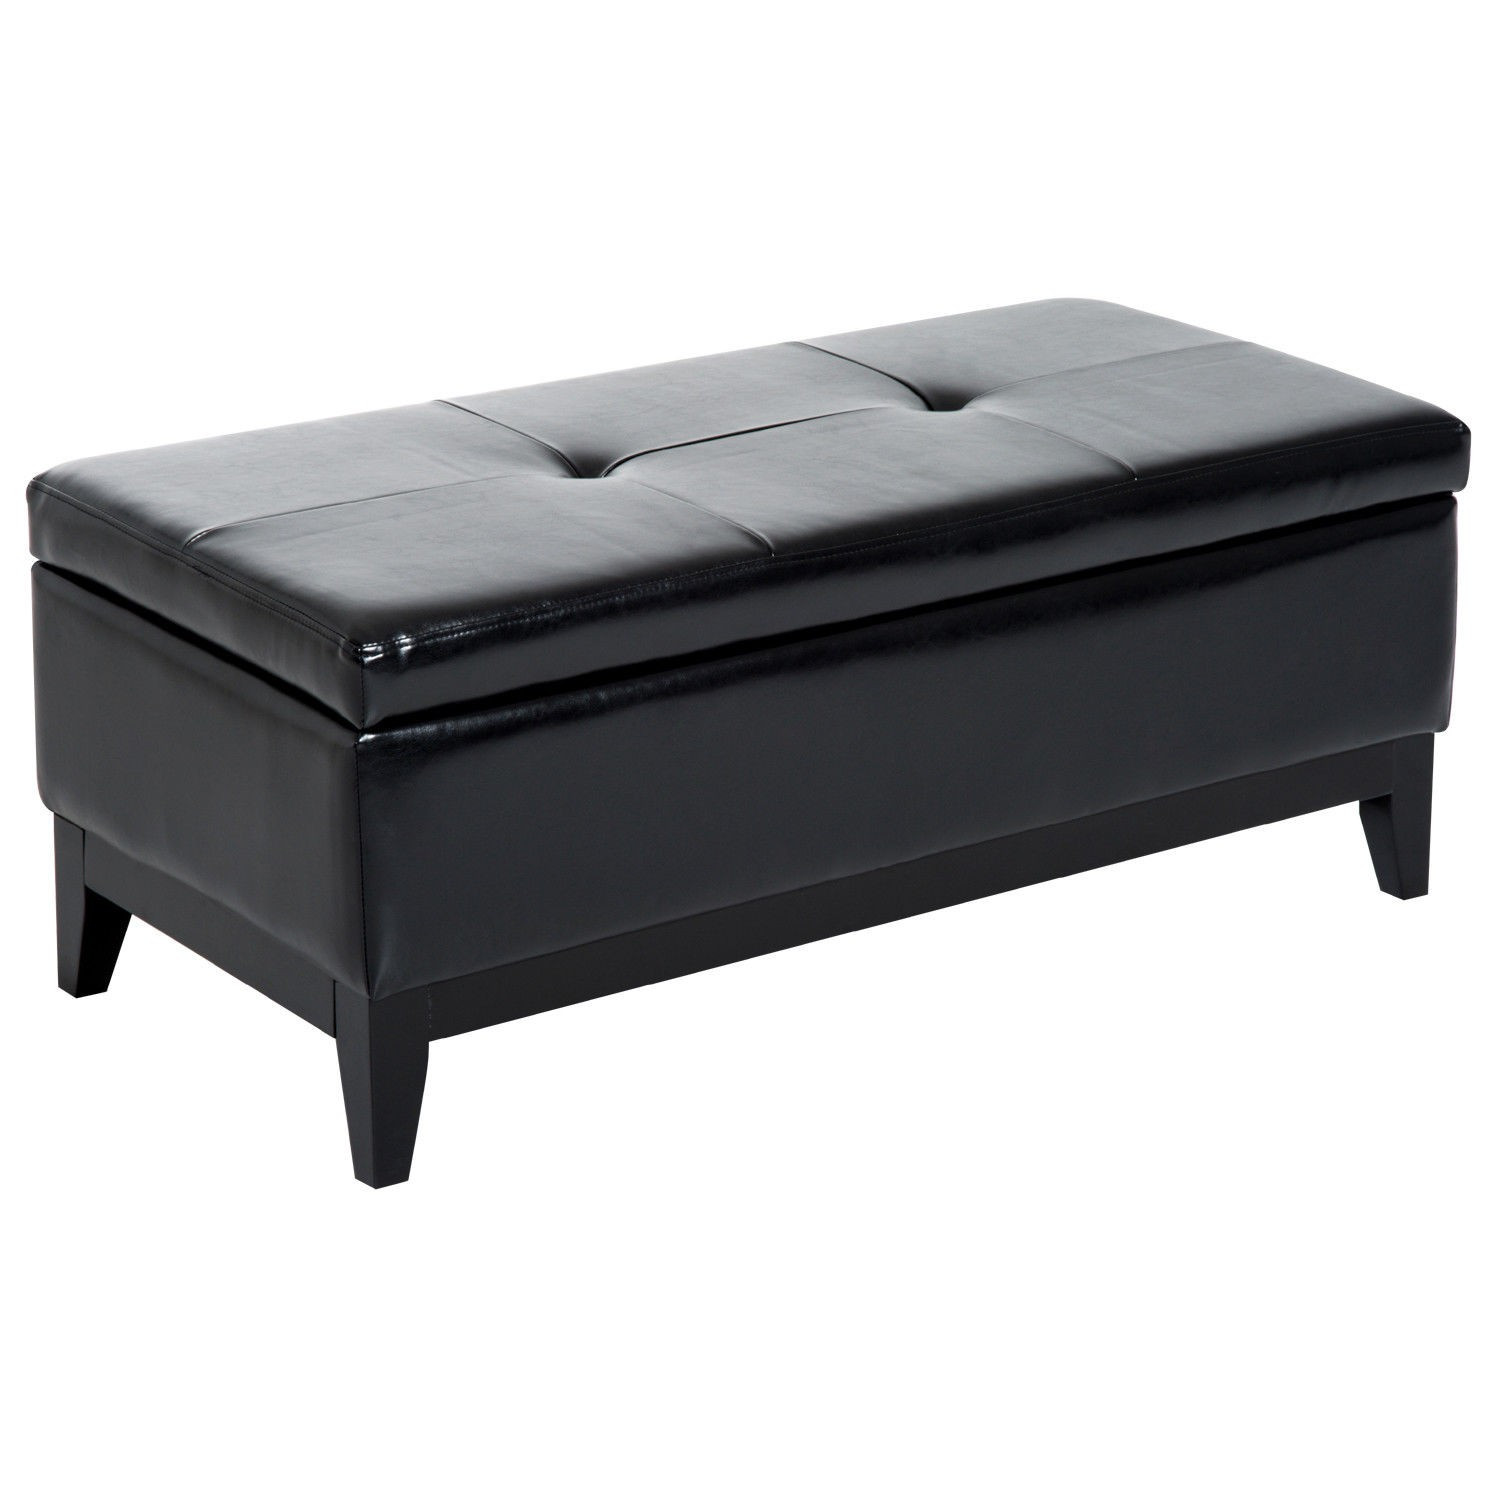 Storage Bench With Tray
 Hom 42” Rectangular Faux Leather Storage Ottoman Bench